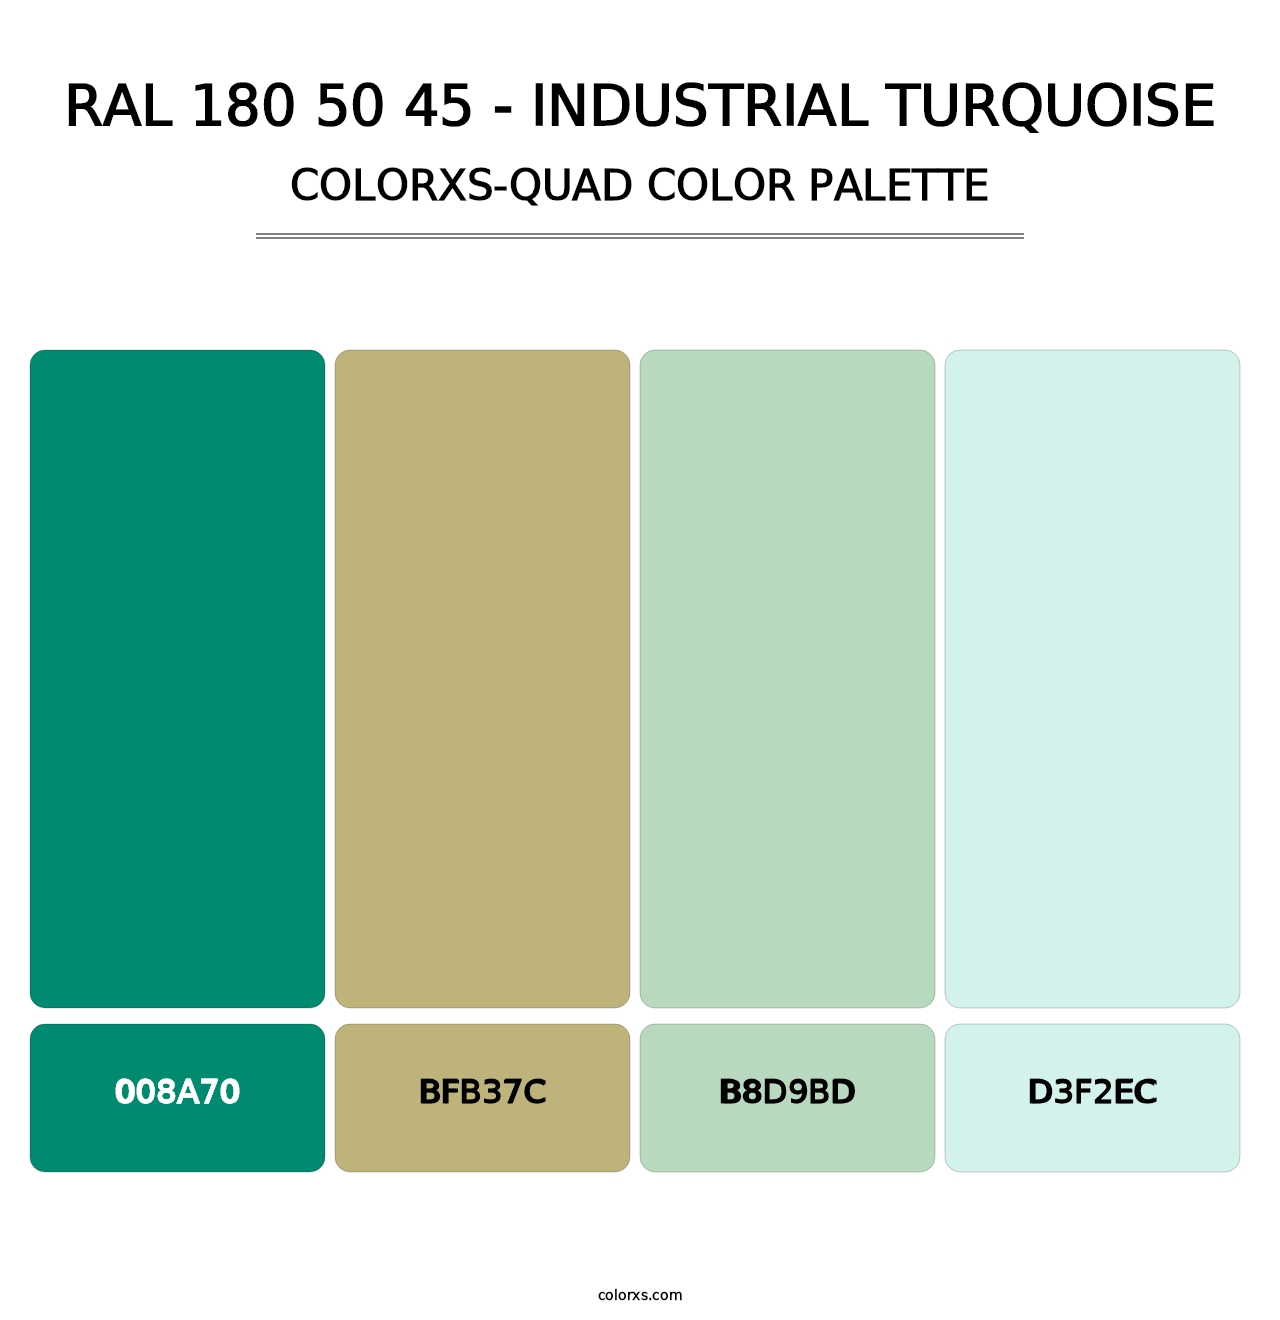 RAL 180 50 45 - Industrial Turquoise - Colorxs Quad Palette